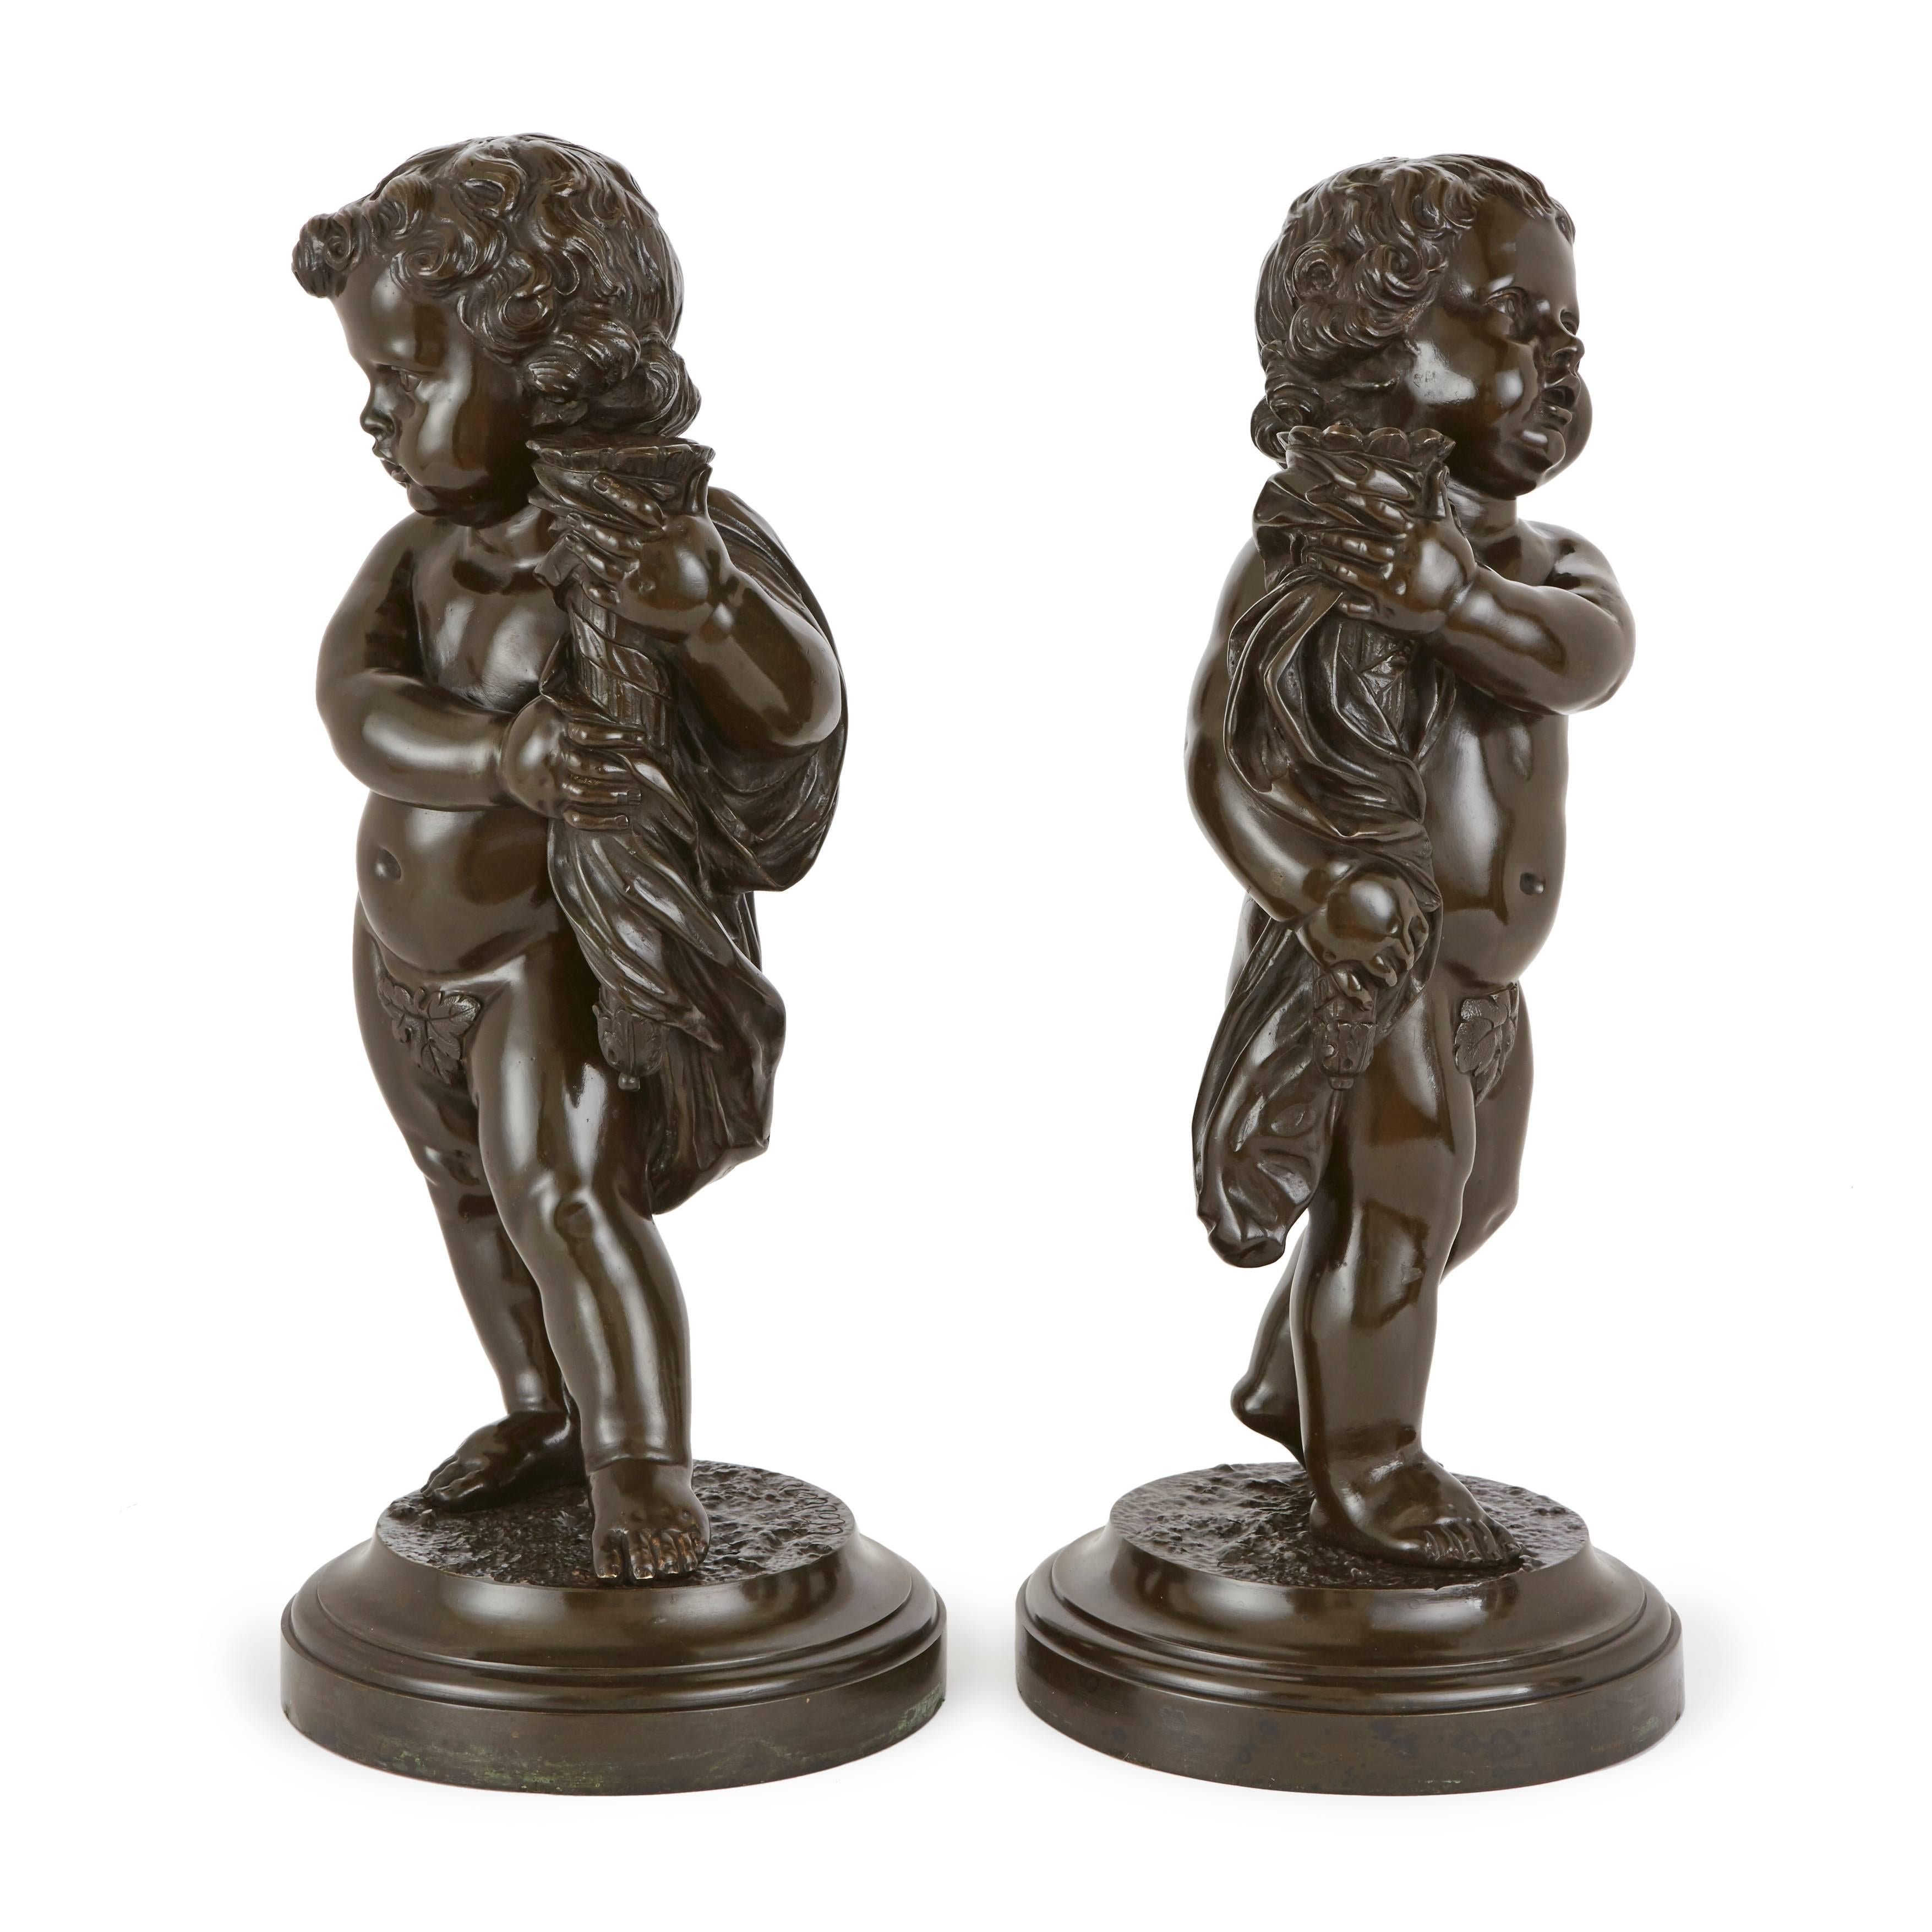 Each shown holding a torchere and standing on a round base, signed to the base 'Clodion'. 

These delicately cast French cherubs are inspired by the tales of Classical mythology, each holding a torchere - traditionally a symbol of love.